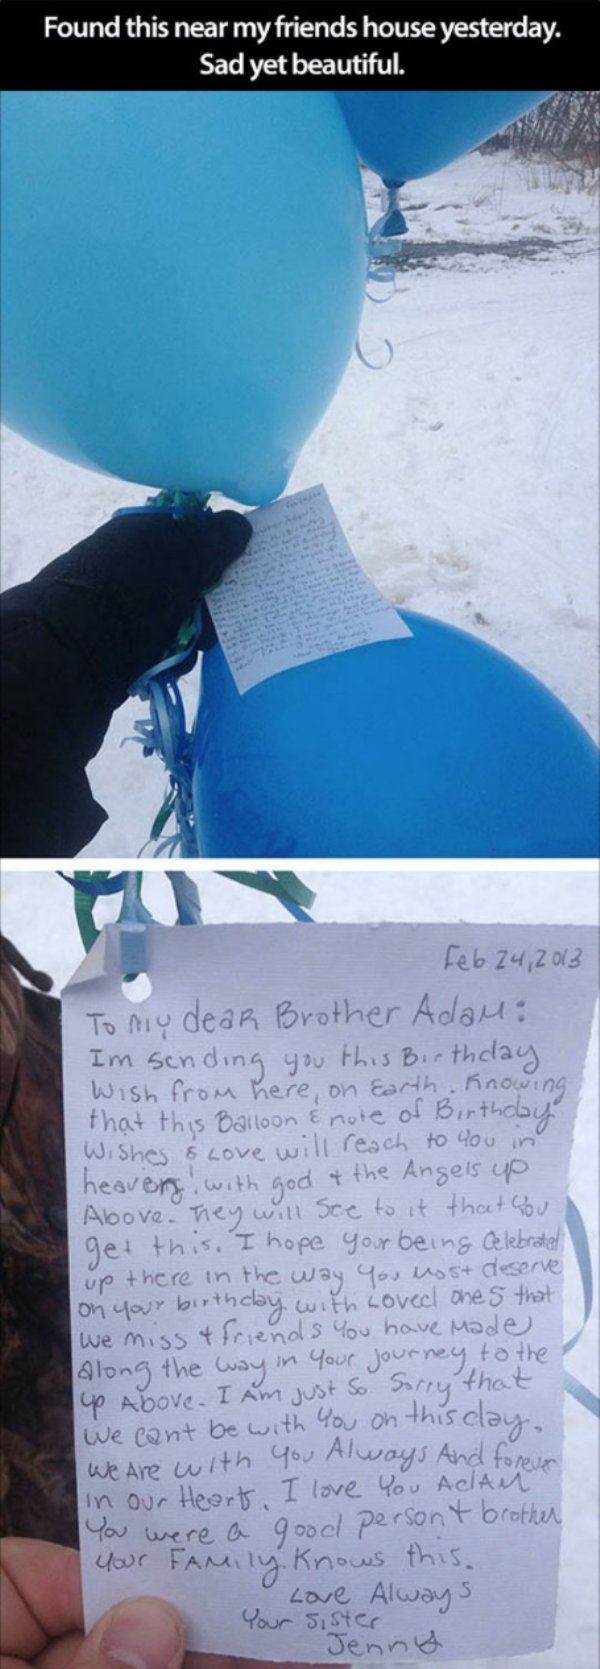 water - Found this near my friends house yesterday. Sad yet beautiful. To my dear Brother Adan Im sending you this Birthday Wish from here on earth. Knowing that this Balloon E note of Birthoby Wishes & love will reach to you in heaven with God & the Ange